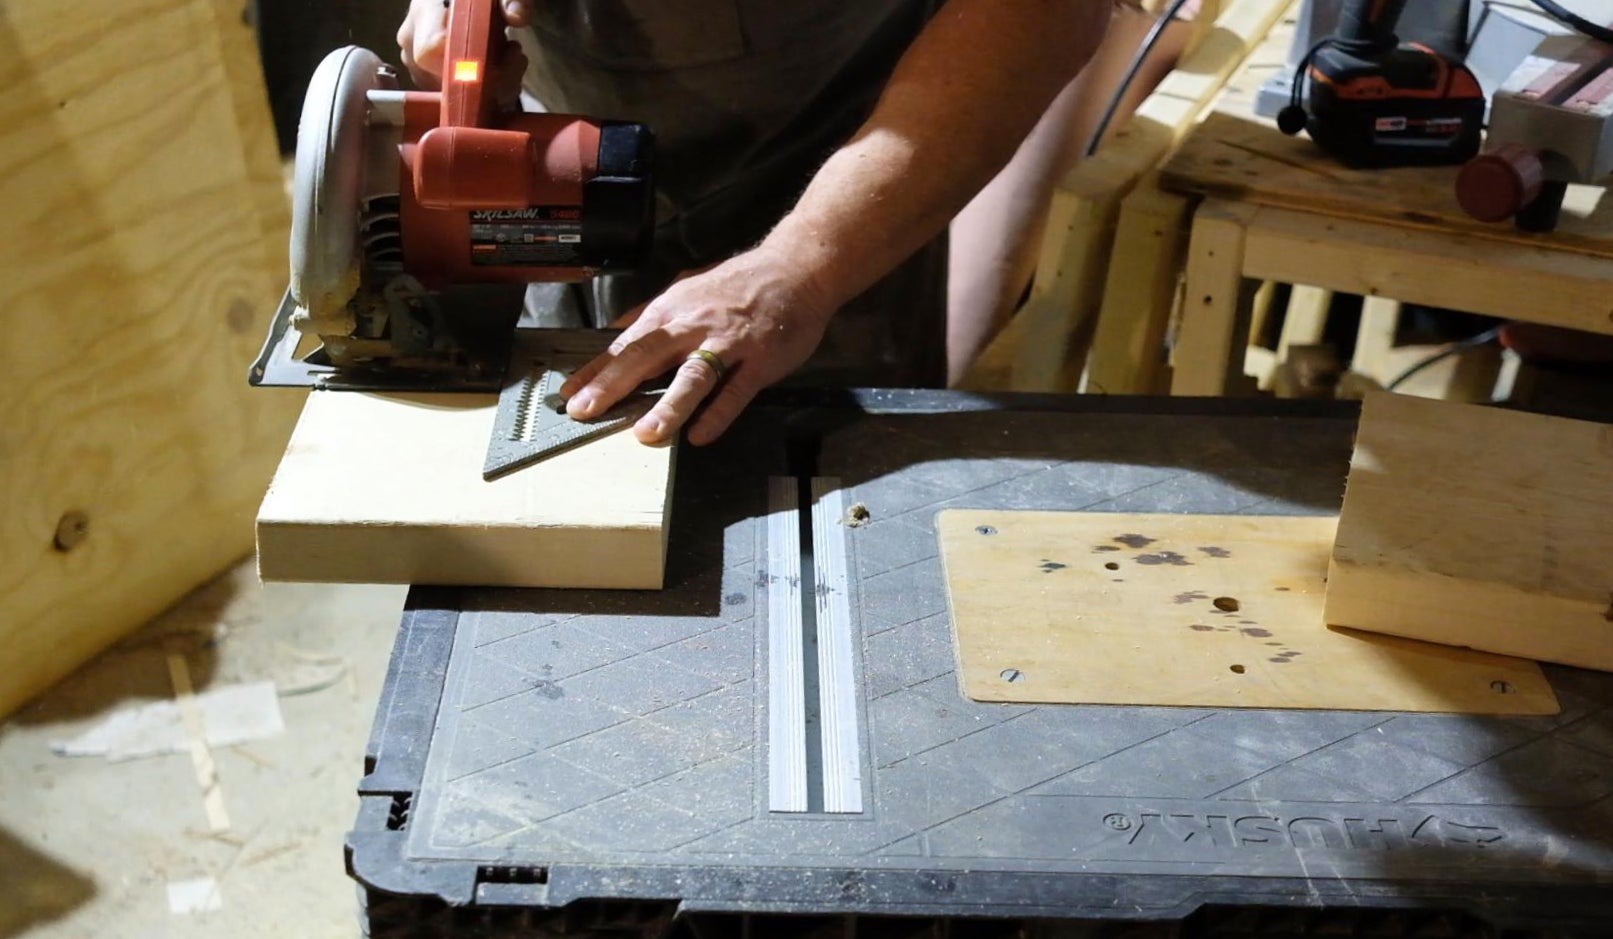 A man in a workshop uses a circular saw and speed square to make a square cut on a small piece of wood.